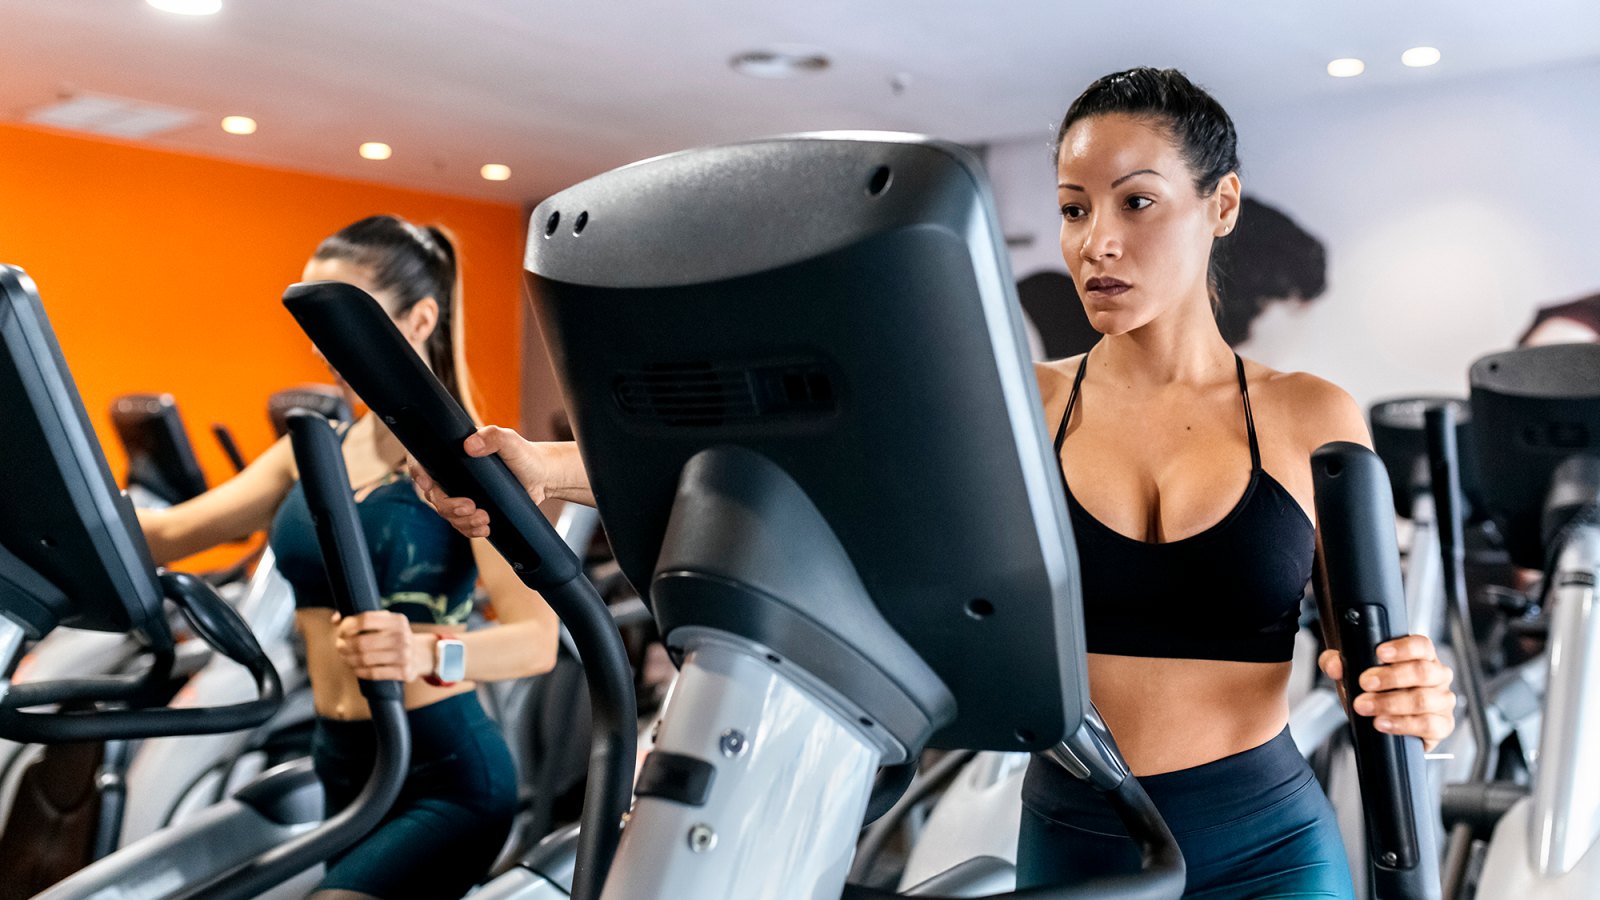 The Best Elliptical for Easy At-Home Workouts Is Under $100 at